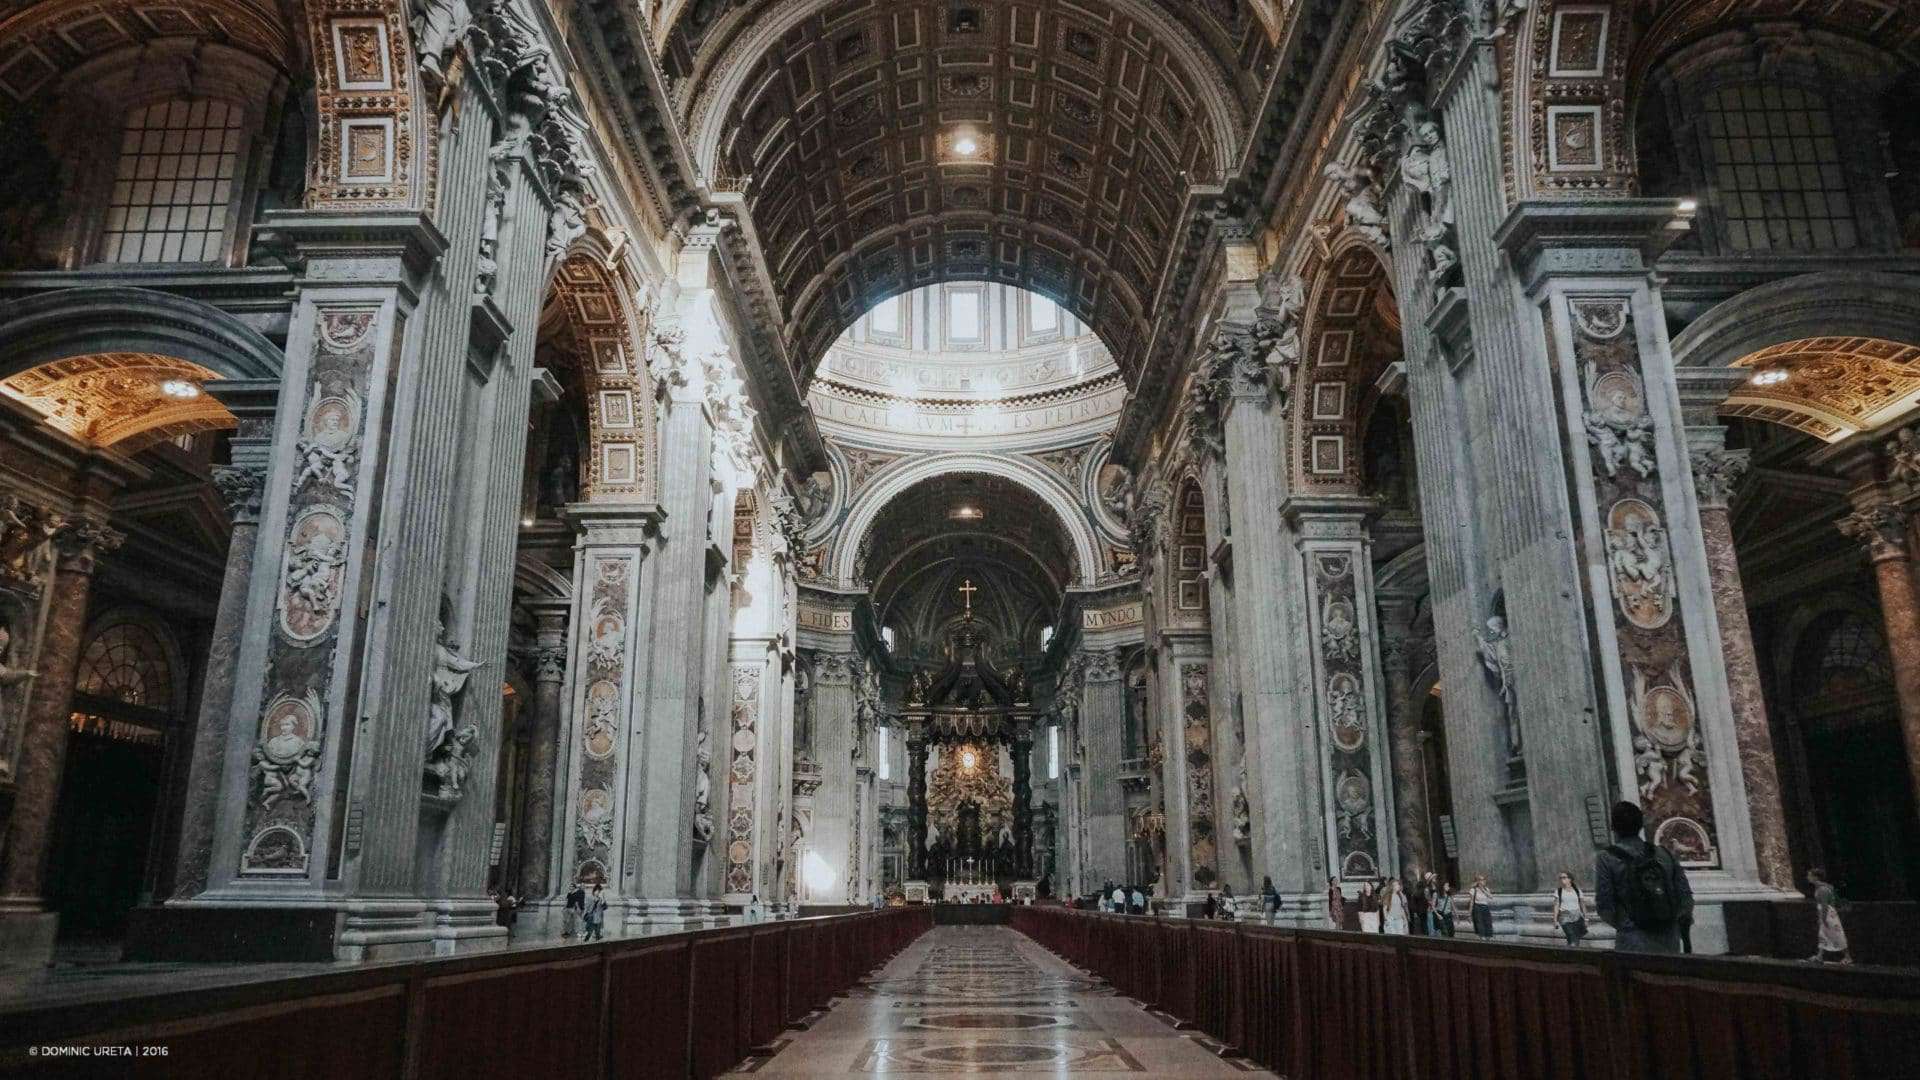 St. Peter's Basilica is the focal point of Vatican City. Magisterial teaching comes from the Pope united with the Bishops.